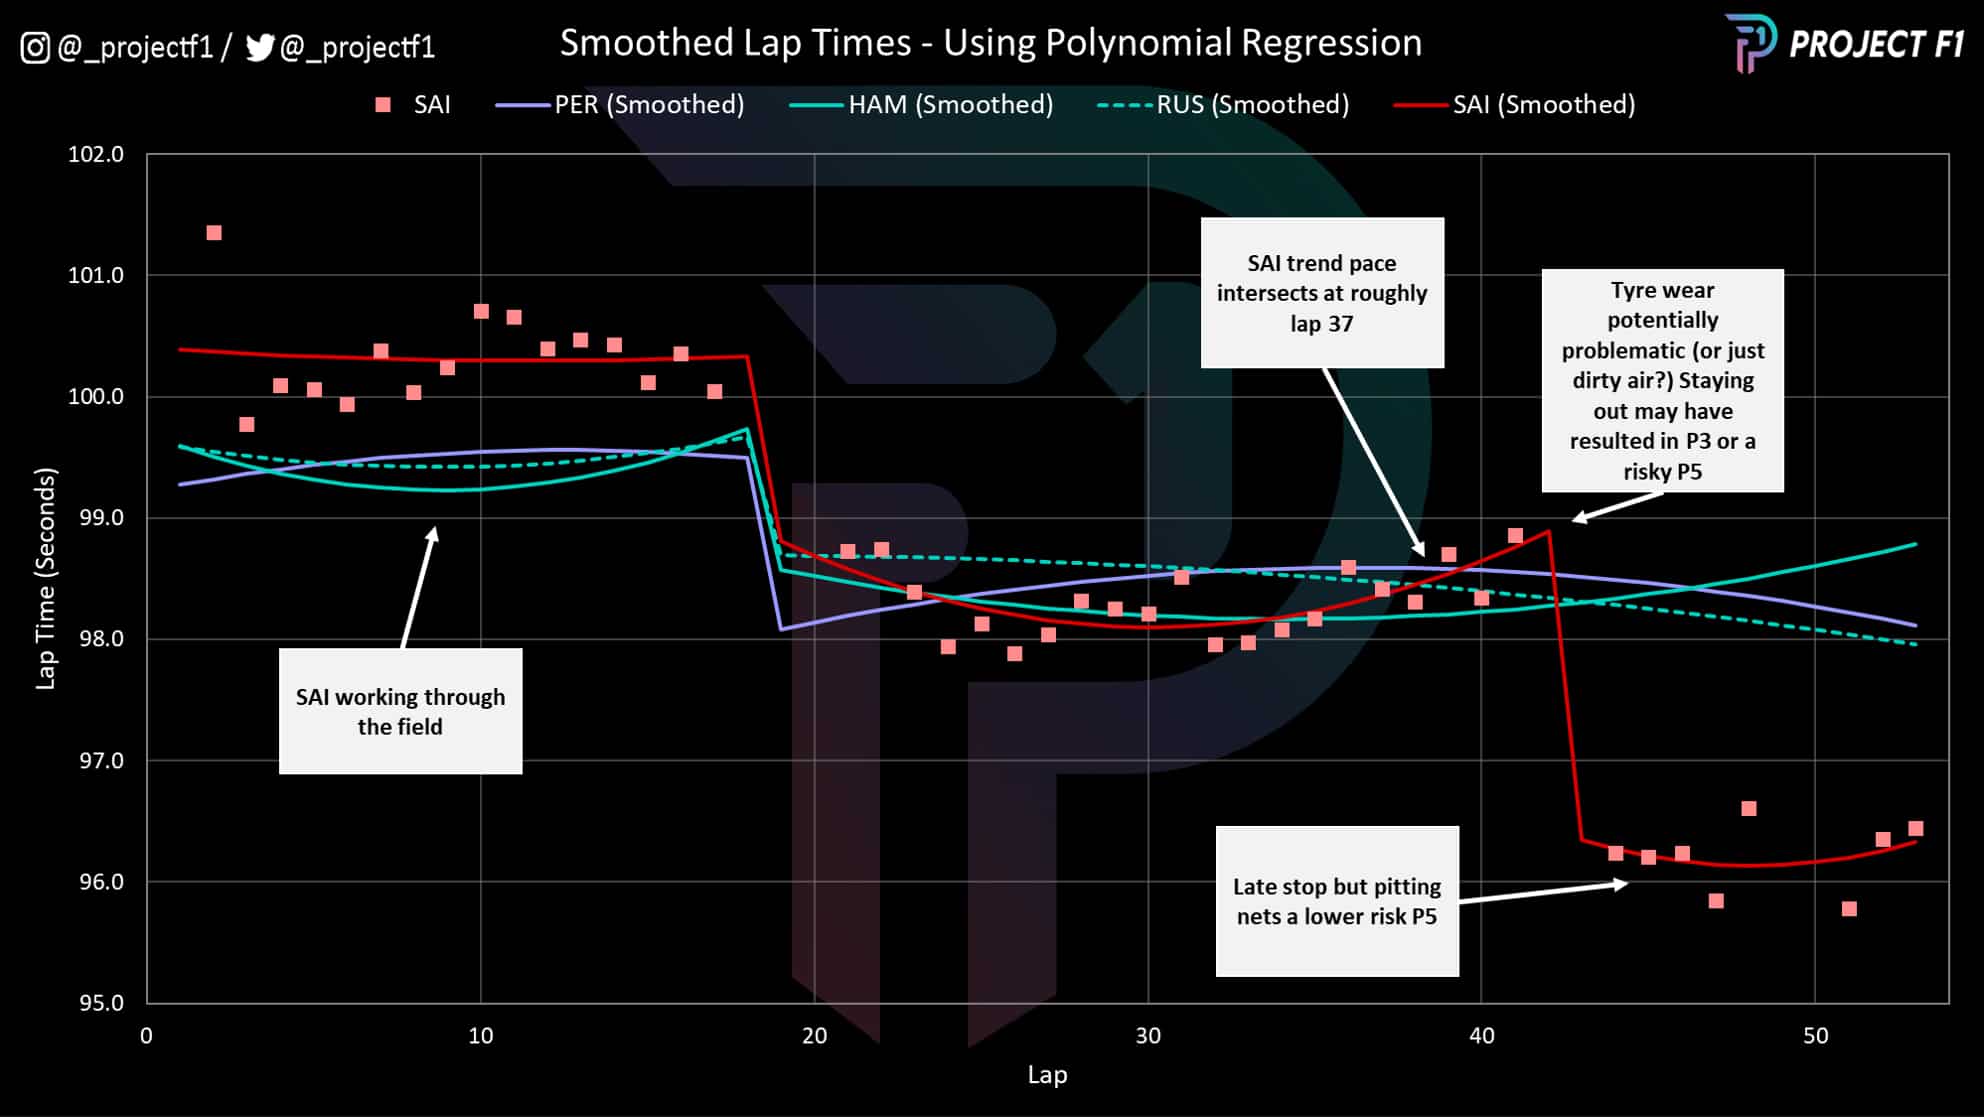 2022 French GP smoothed lap times graph